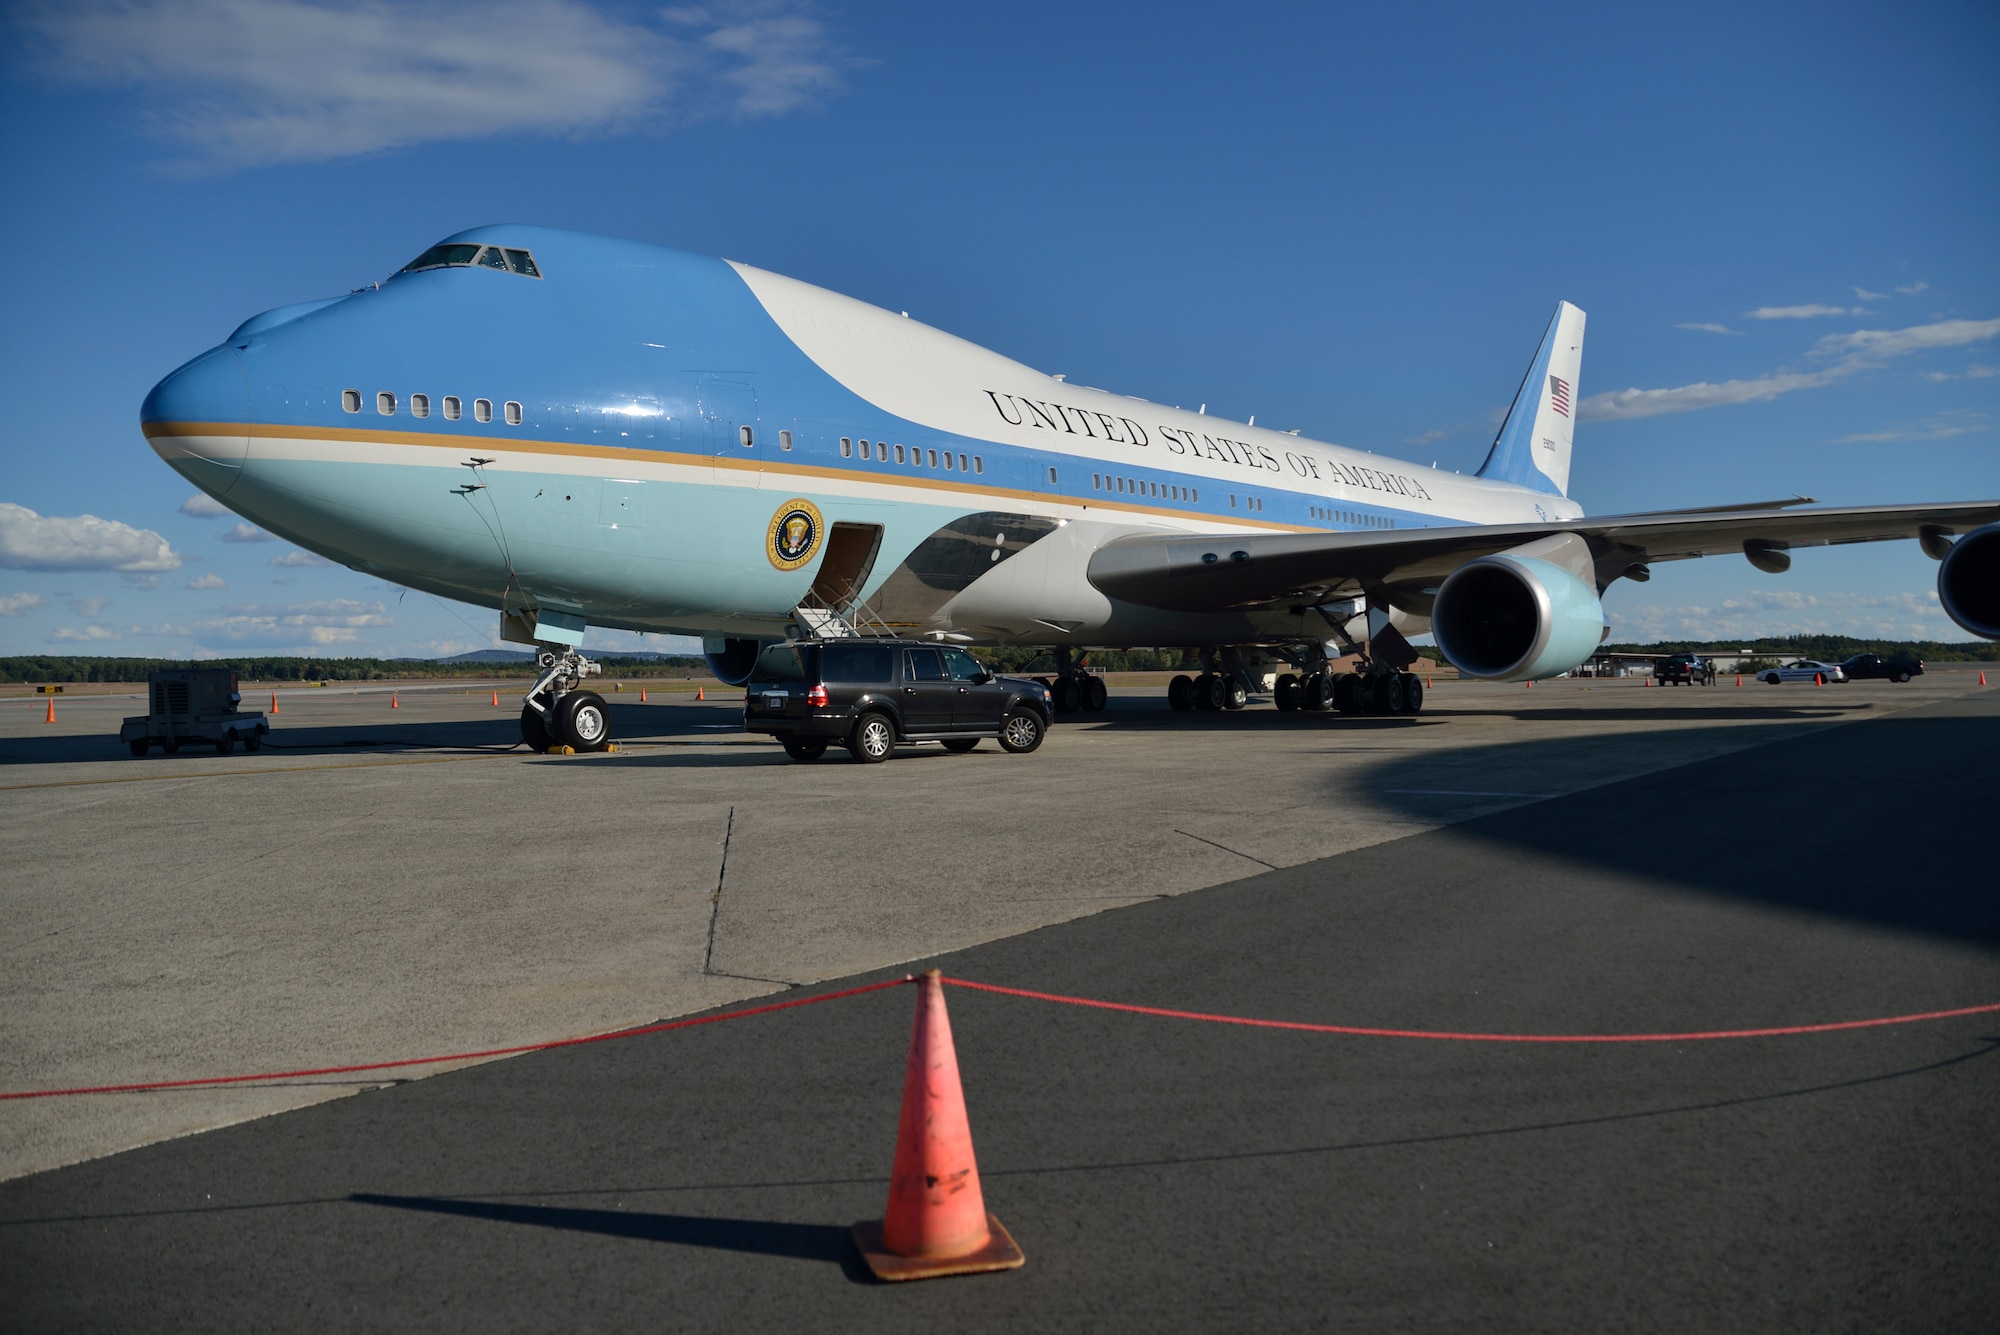 The aircraft that flies the president stayed overnight at Westover Air Reserve Base.   The VC-25A  arrived Sept.  24 after dropping off President Barack Obama in New York City for the United Nations summit. It left the next day. (Air Force photo by W.C.Pope)  
